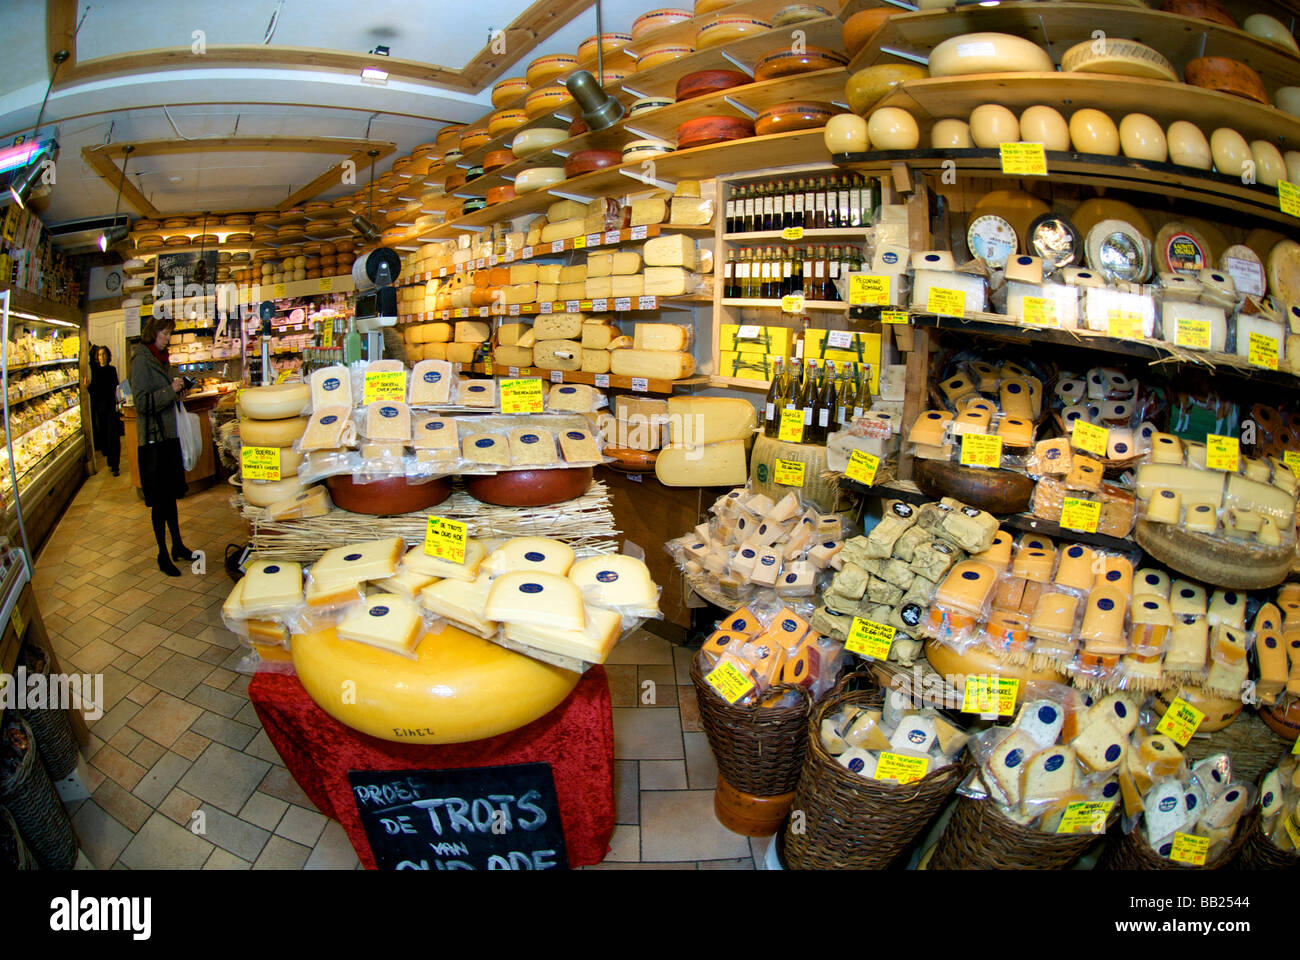 Europe, Netherlands, North Holland, Amsterdam, Interior of cheese shop Stock Photo